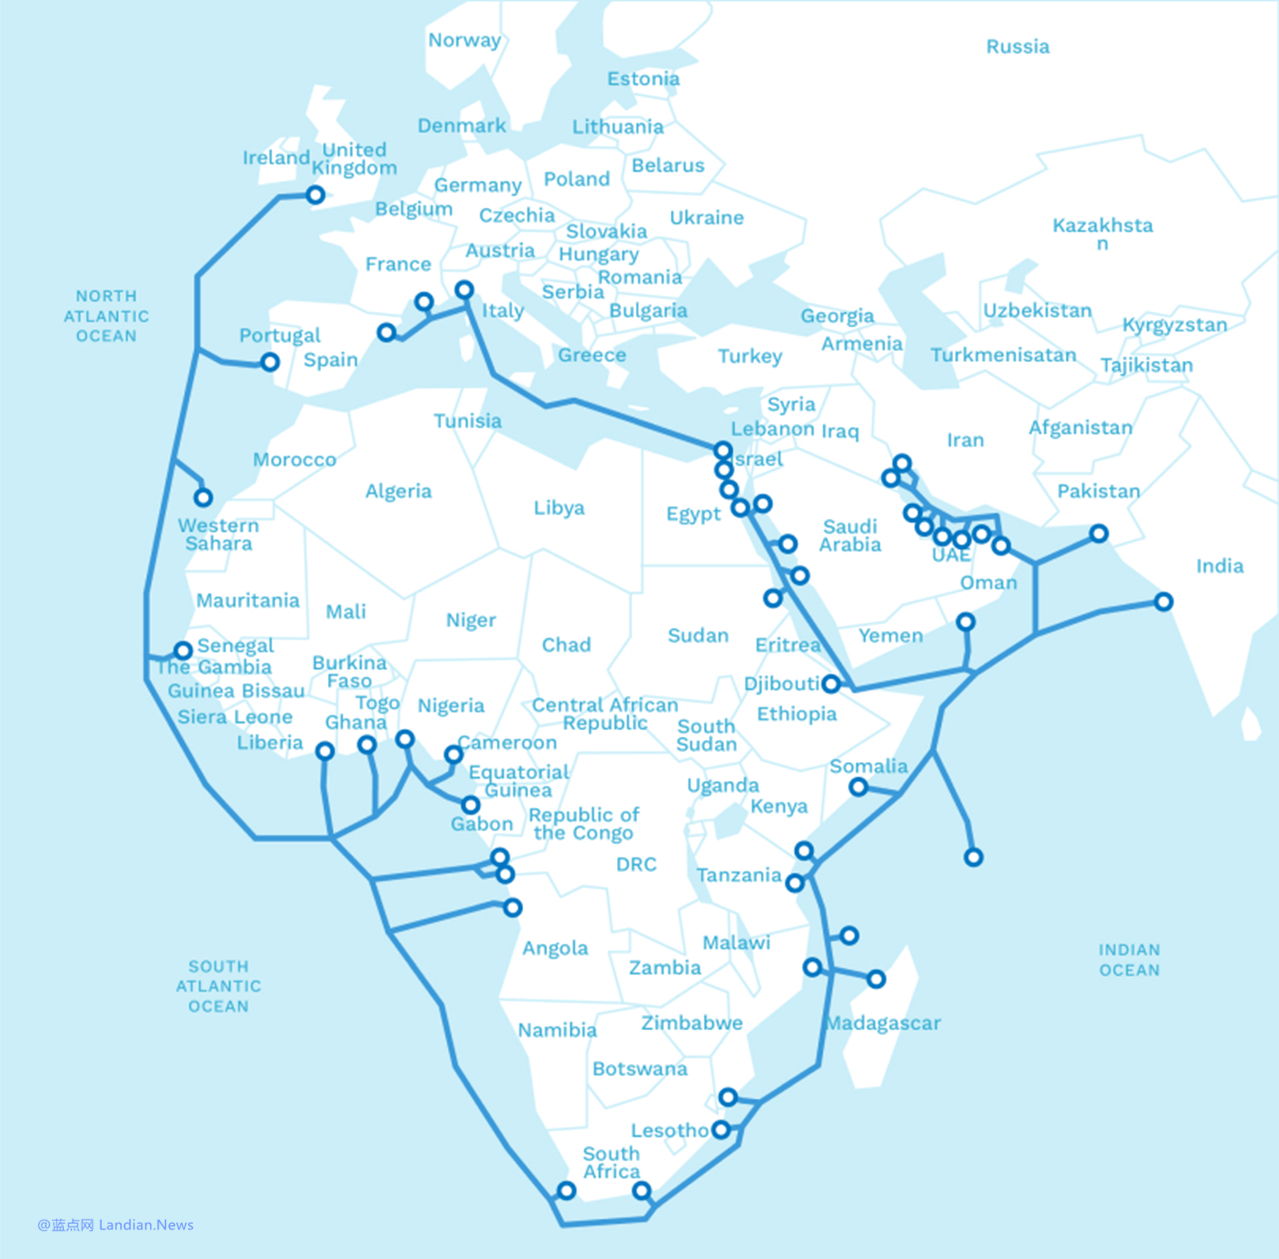 UK Joins the 2Africa Submarine Cable Network, Enhancing Connectivity with Africa and Asia